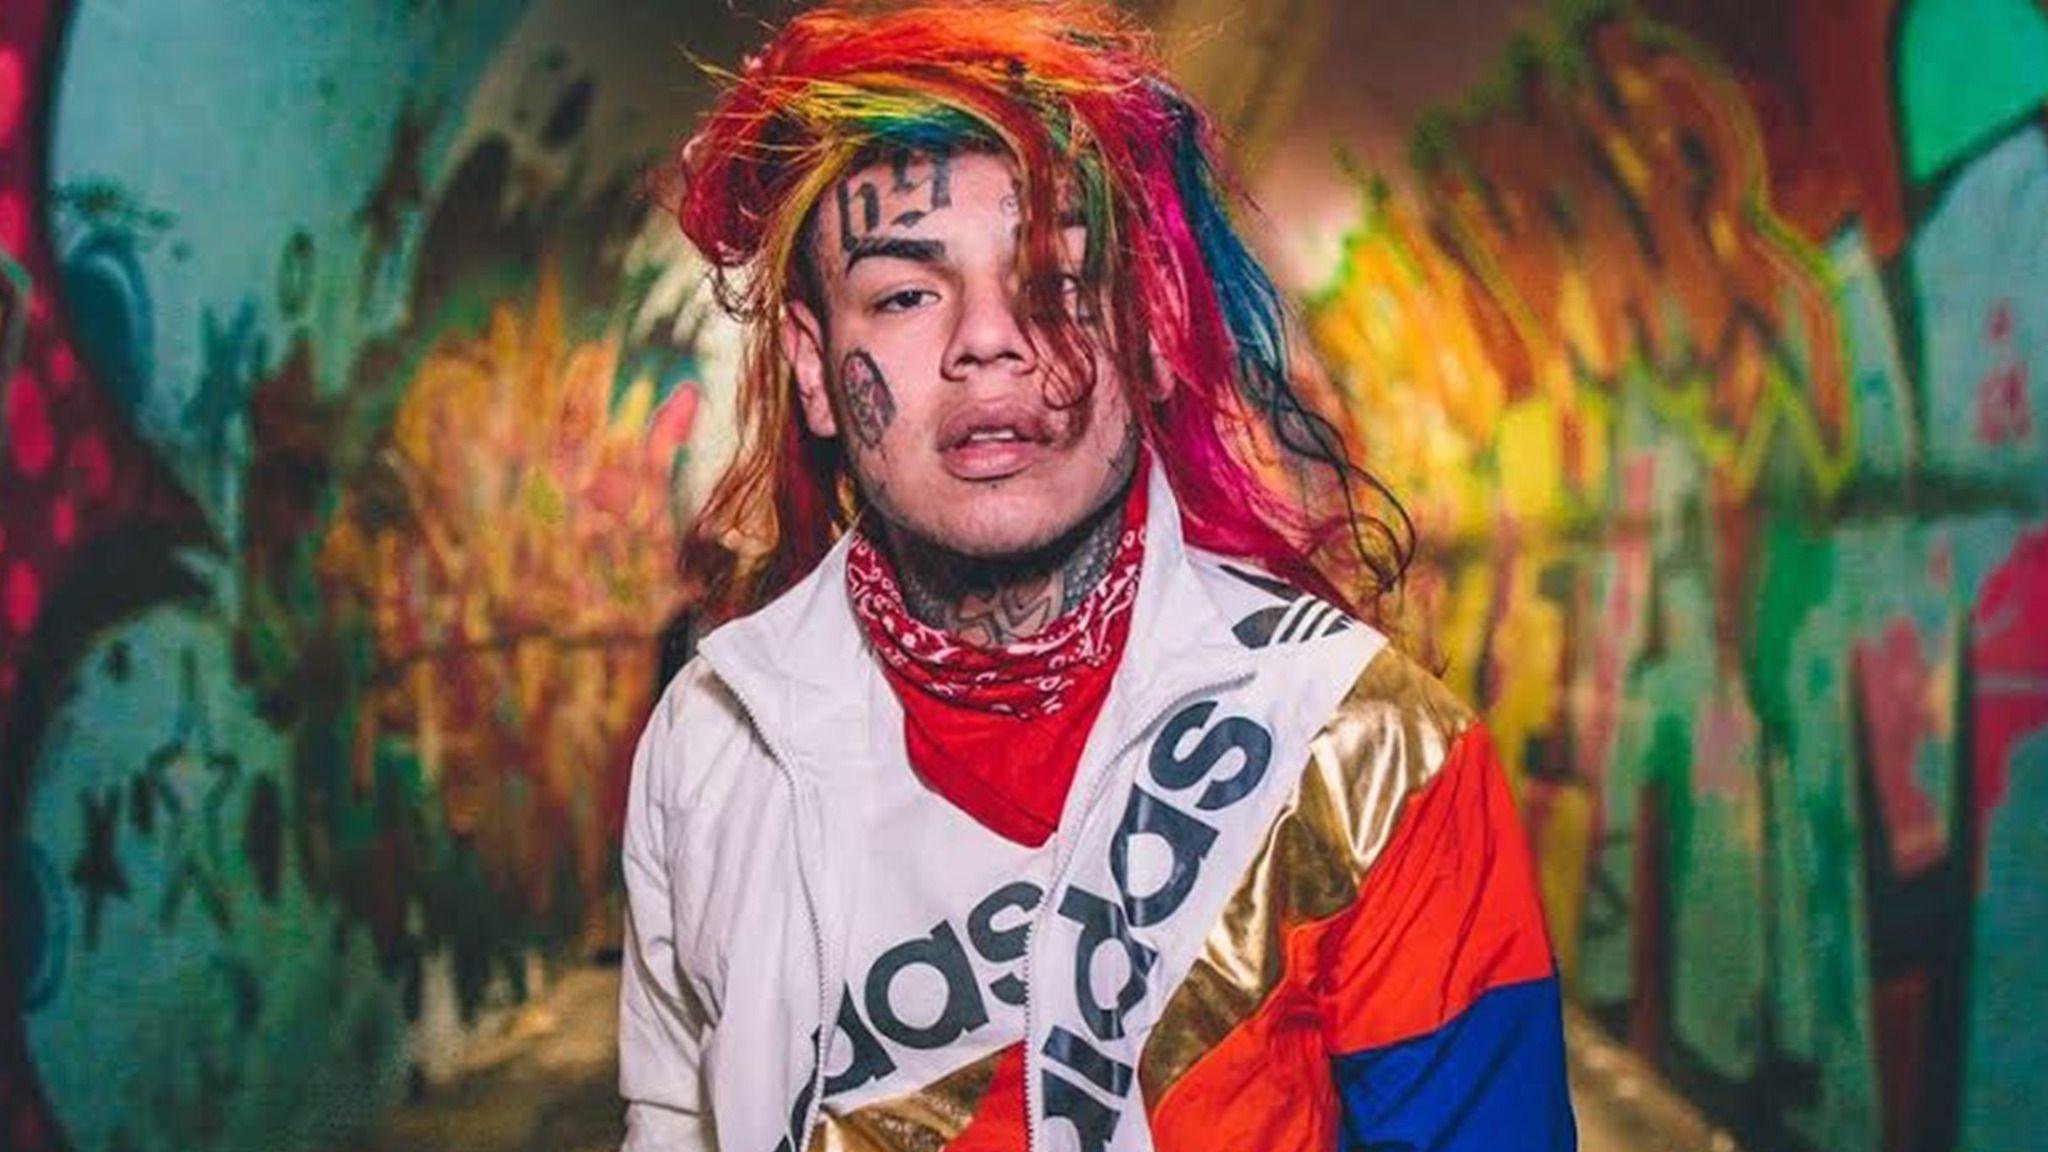 6ix9ine at Toyota Presents the Oakdale Theatre